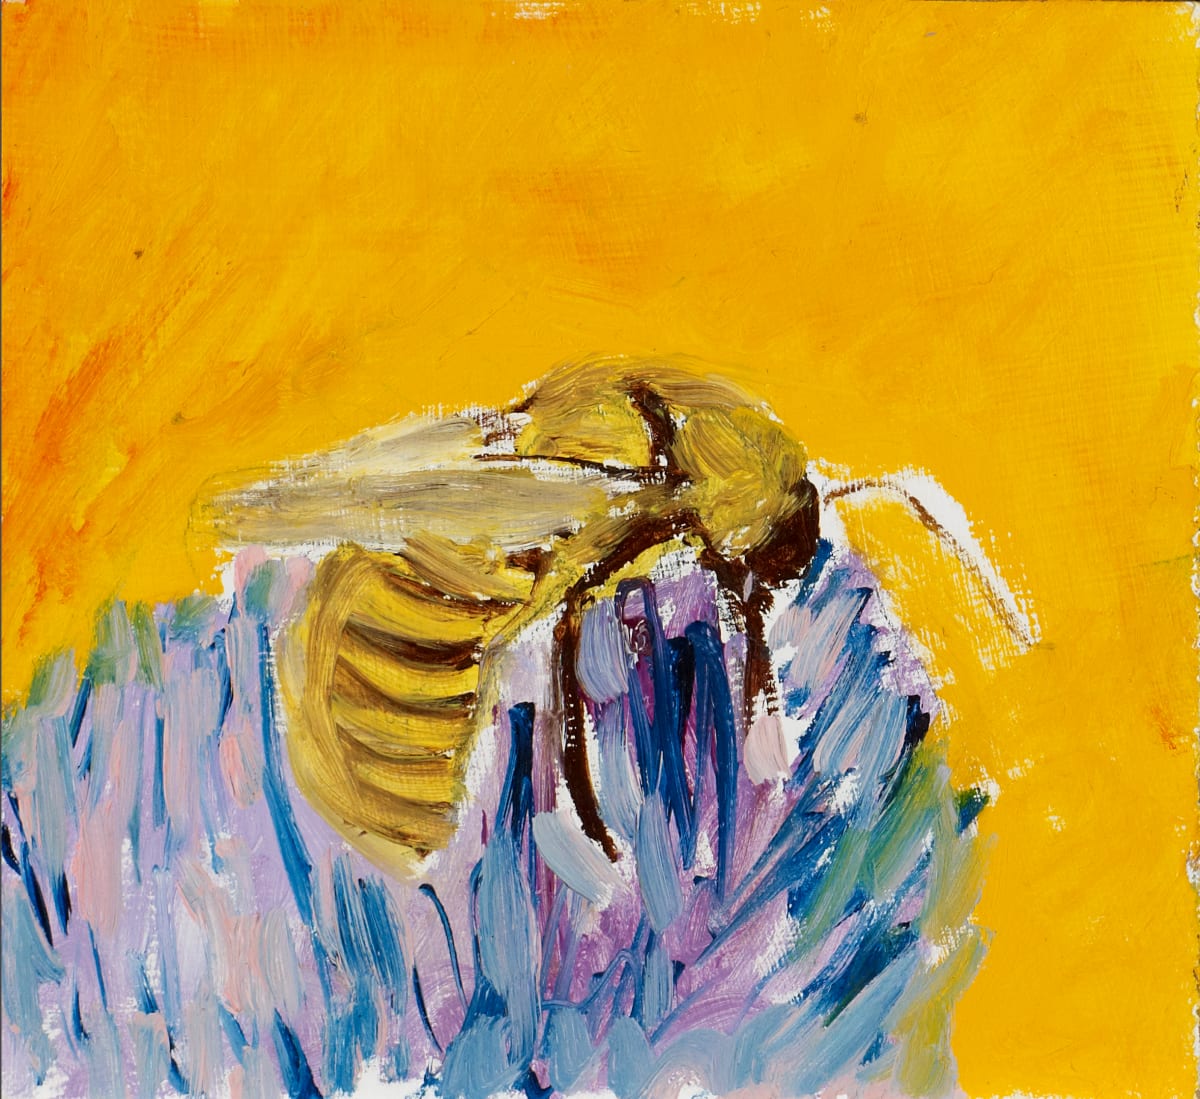 Buzz, Buzz, Goes The Bee by Edgar Turk 